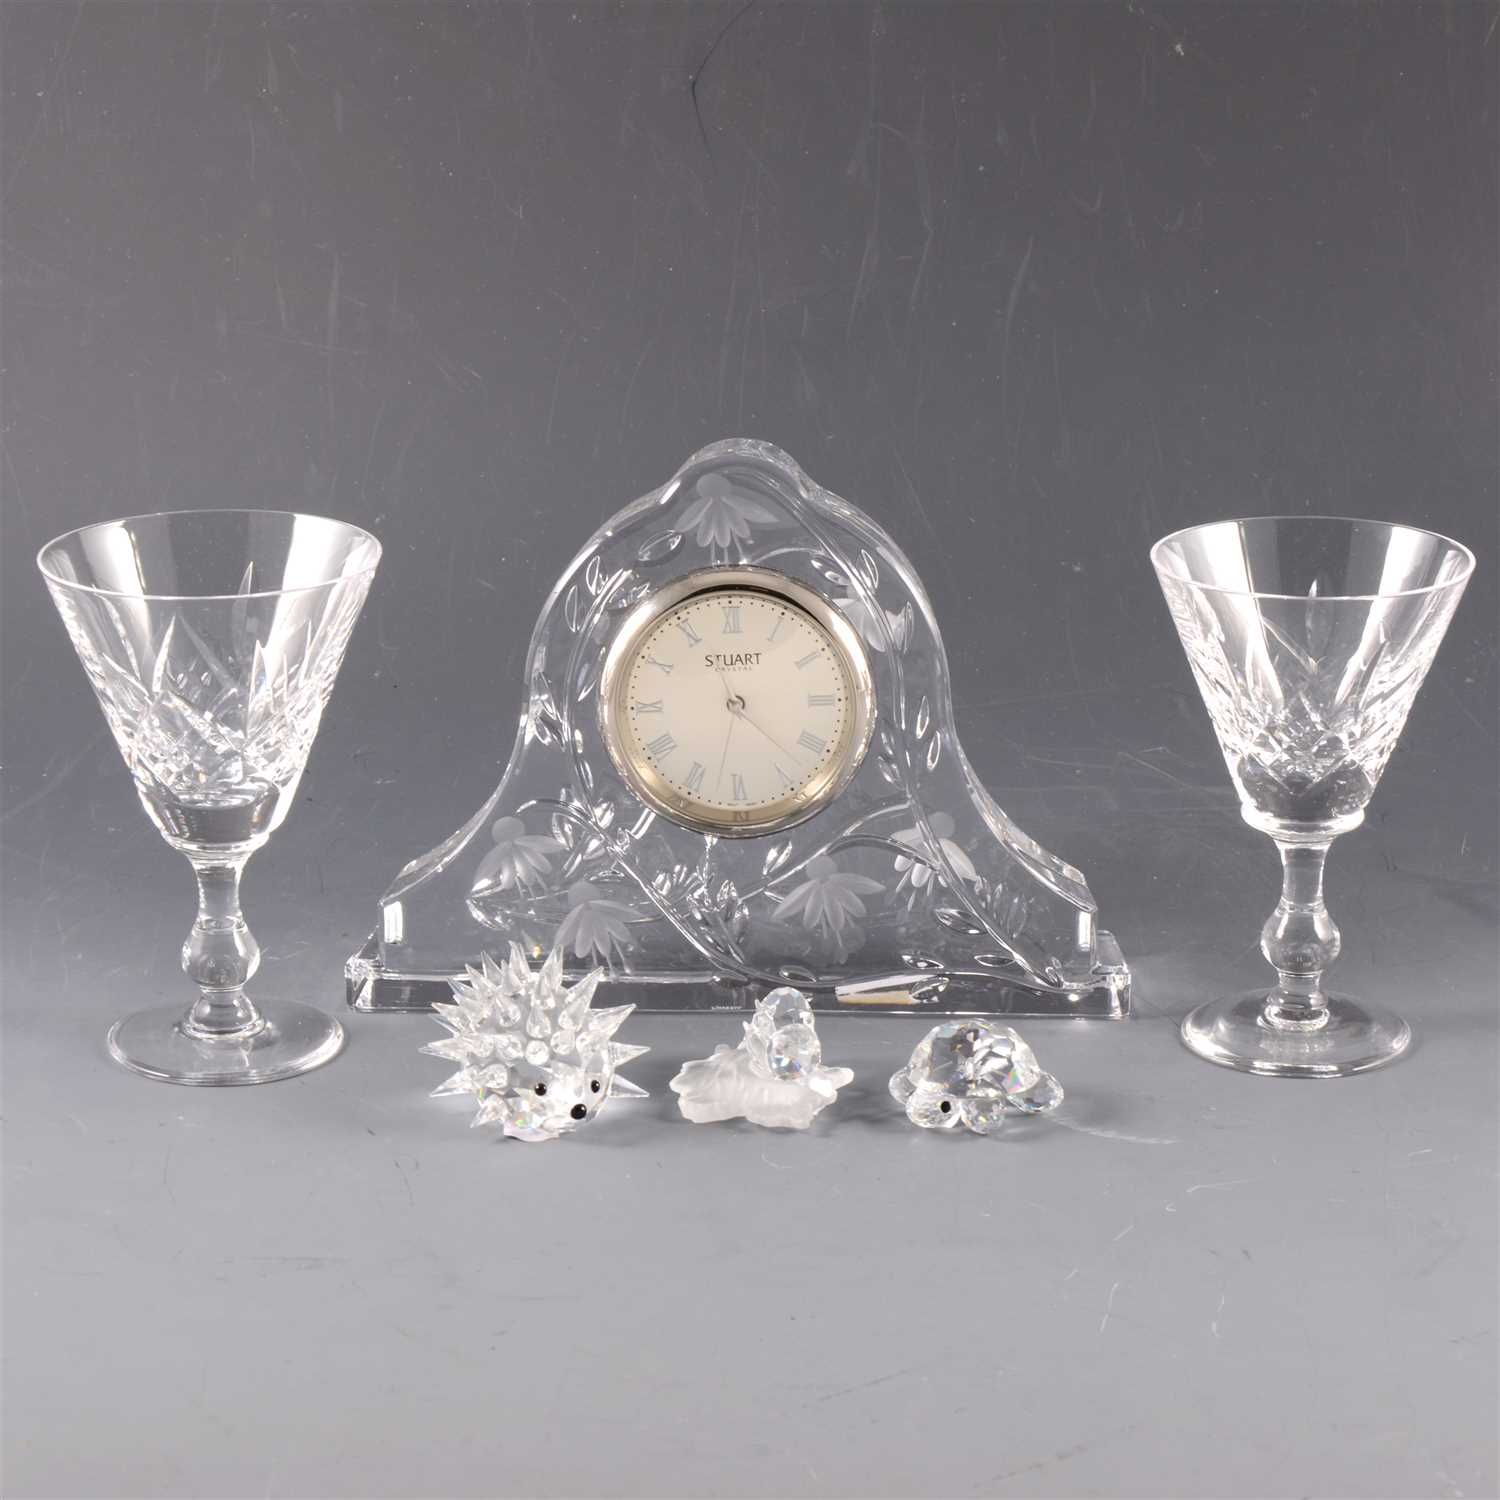 Lot 15 - A collection of glassware, including Waterford Crystal clock, Stuart Crystal clock and Swarovski miniatures